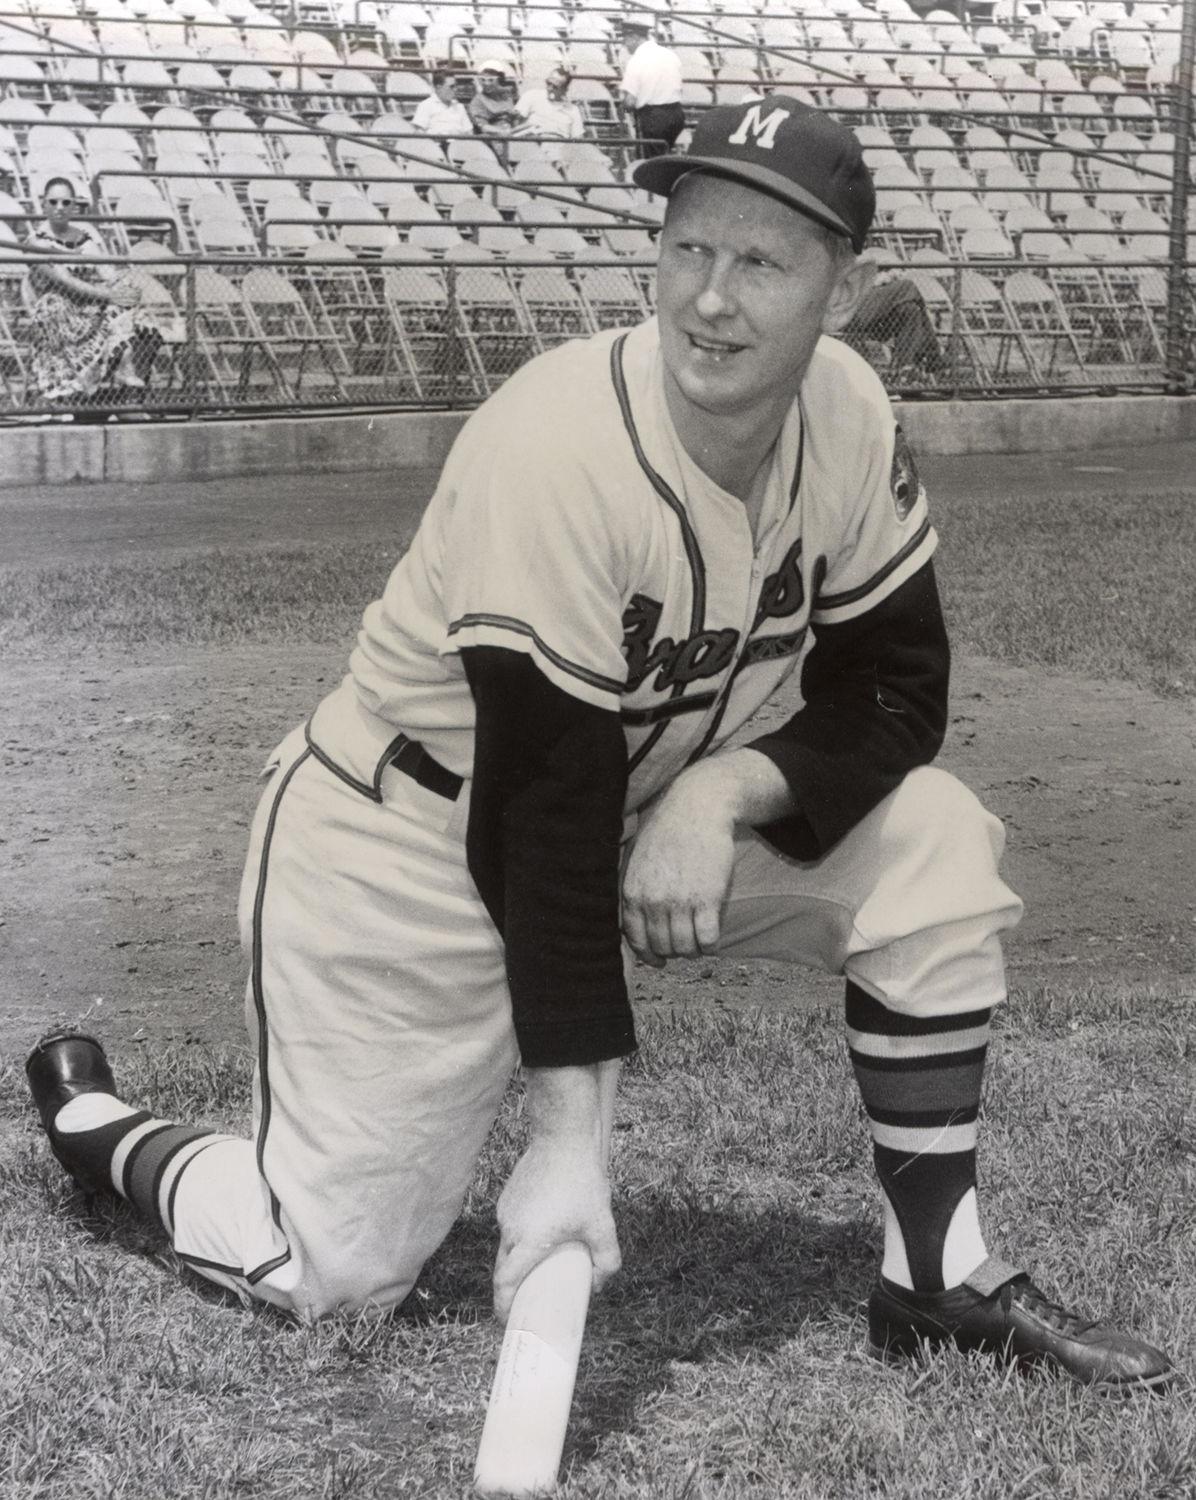 Red Schoendienst #2' on the Left Field Cardinal Hall of F…